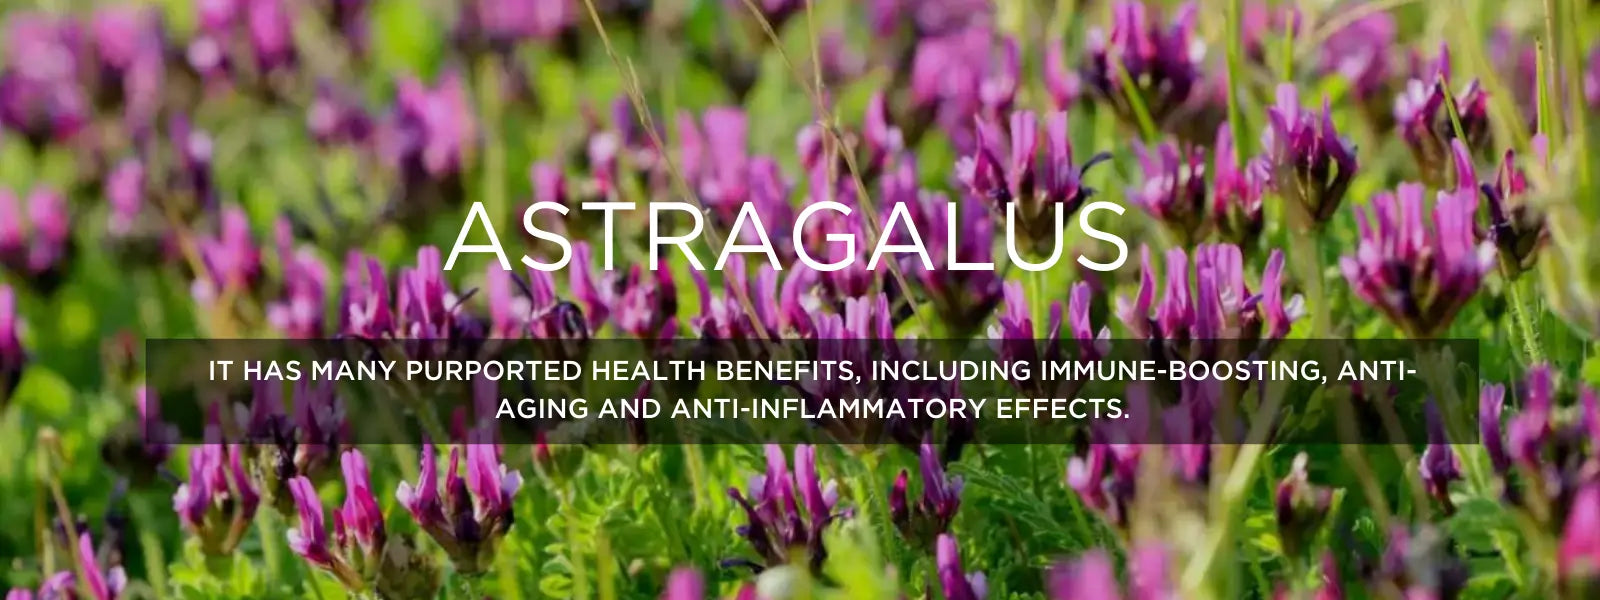 Astragalus - Health Benefits, Uses and Important Facts